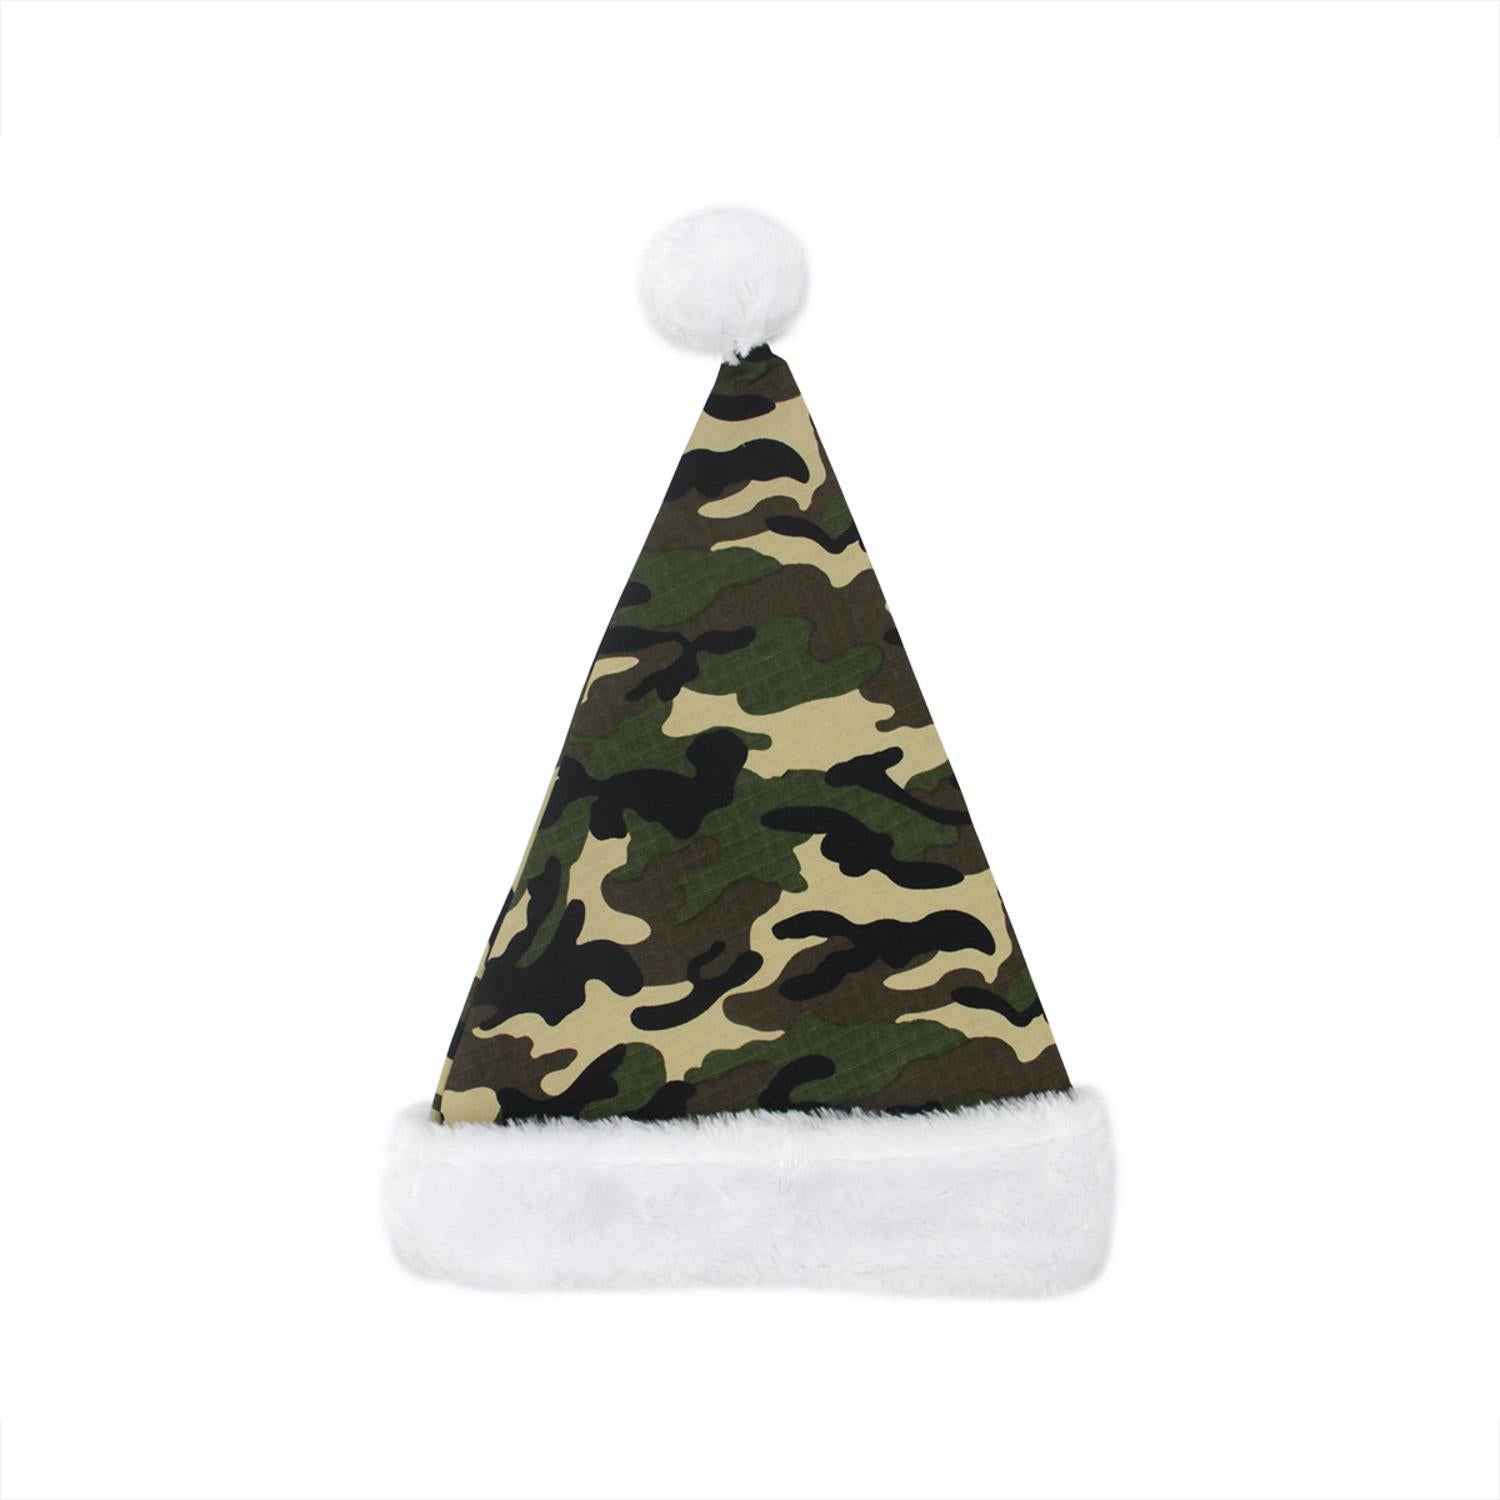 18" Camouflage Faux-Fur Cuffed Christmas Santa Claus Hat Accessory - Adult Size